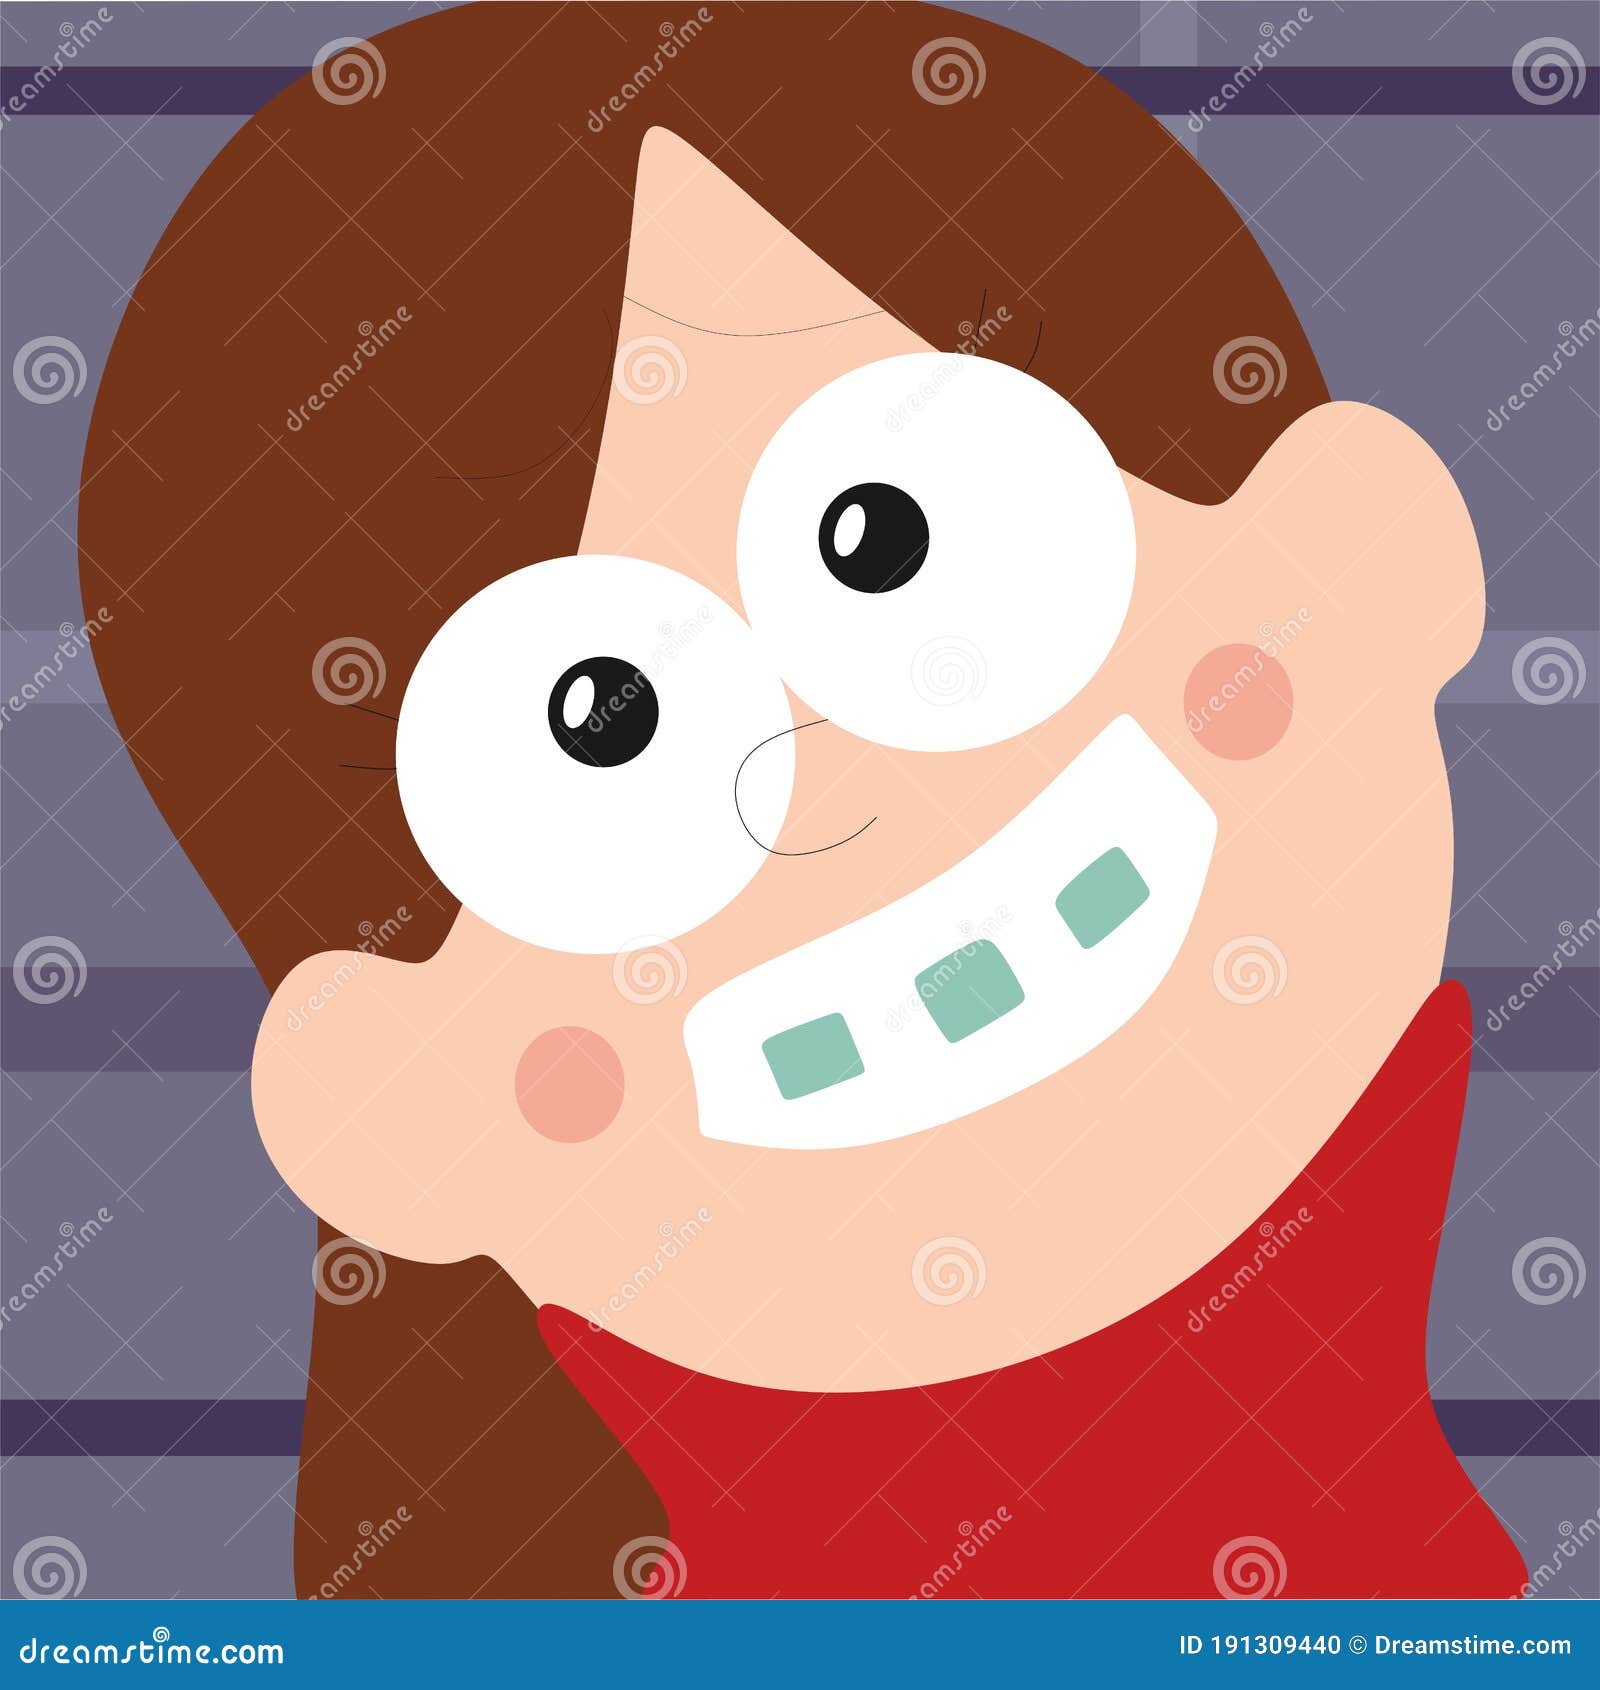 A Smiling, Pretty Girl with Brown Hair and a Red Sweater Wearing   Smile with Orthodontic Treatment Stock Vector - Illustration of dentistry,  concept: 191309440